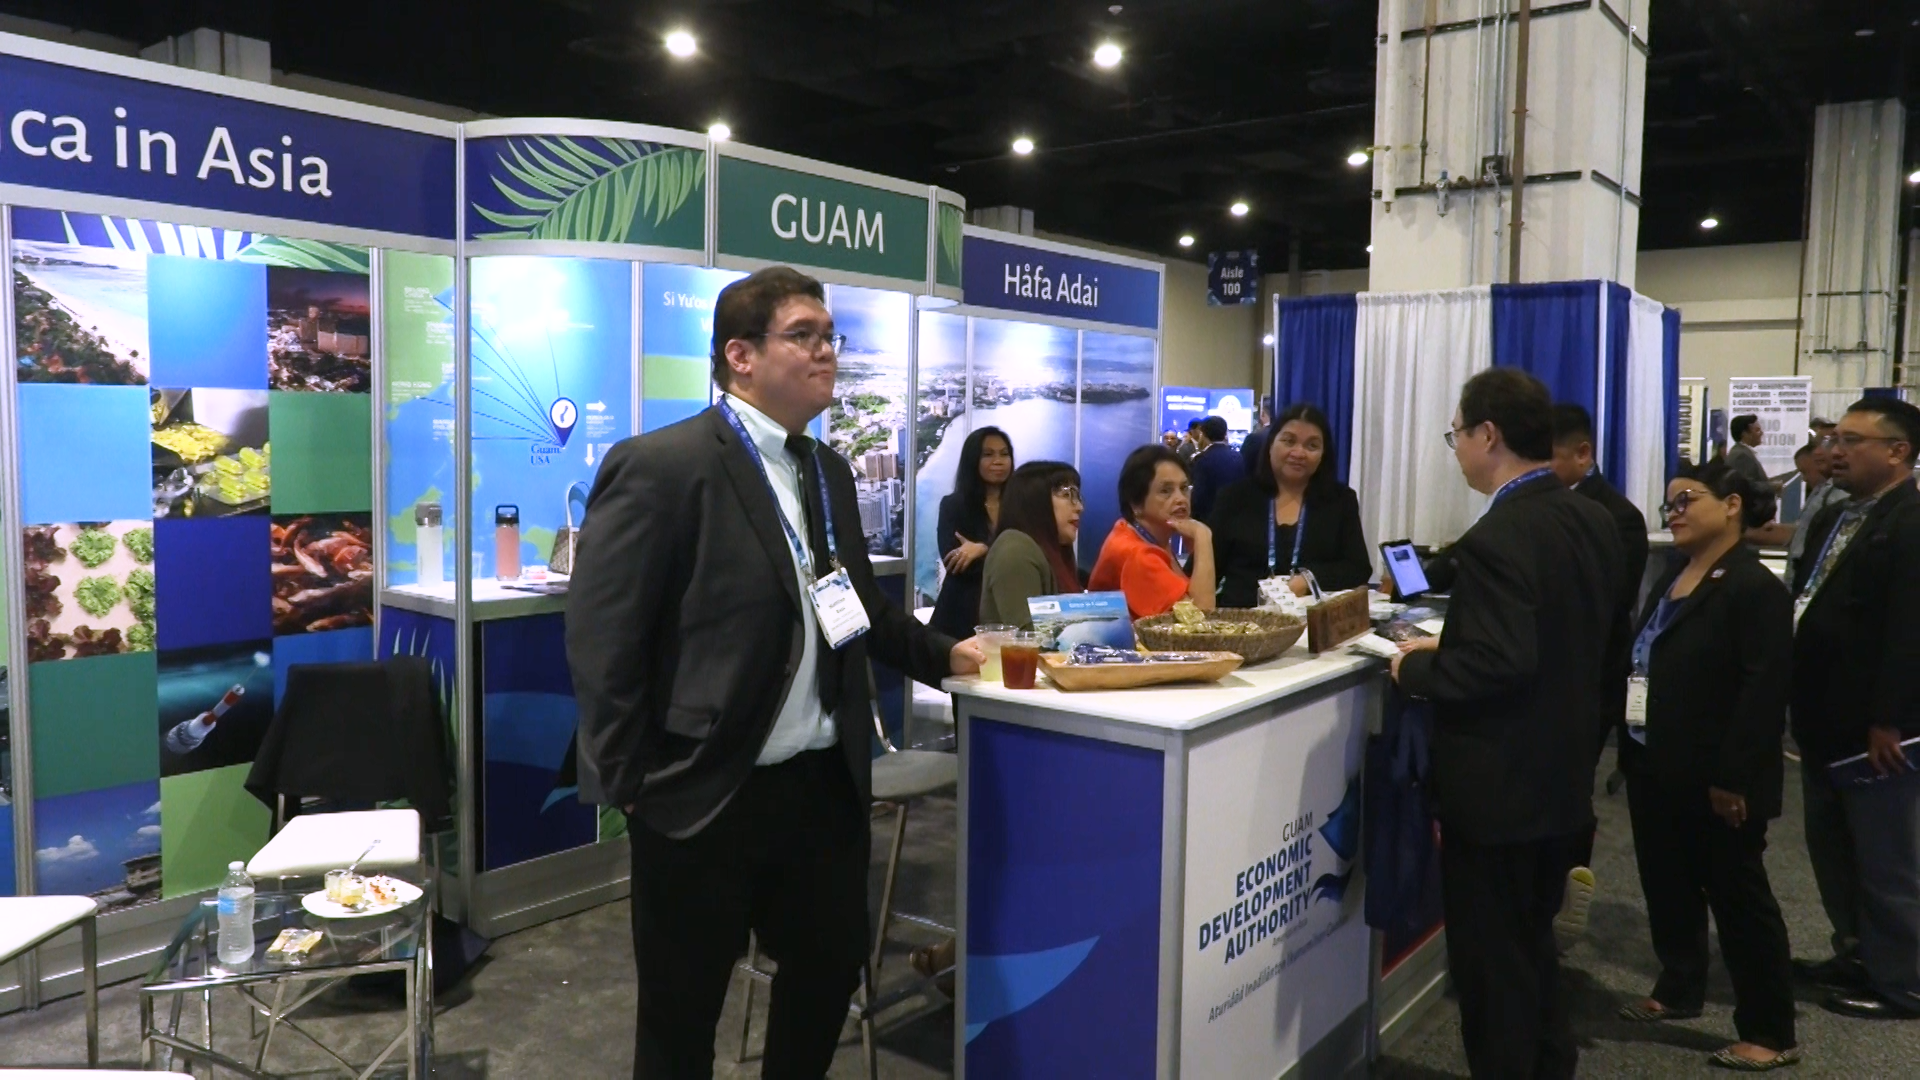 Officials, Leaders Show Guam is Open for Business at SelectUSA Investment Summit